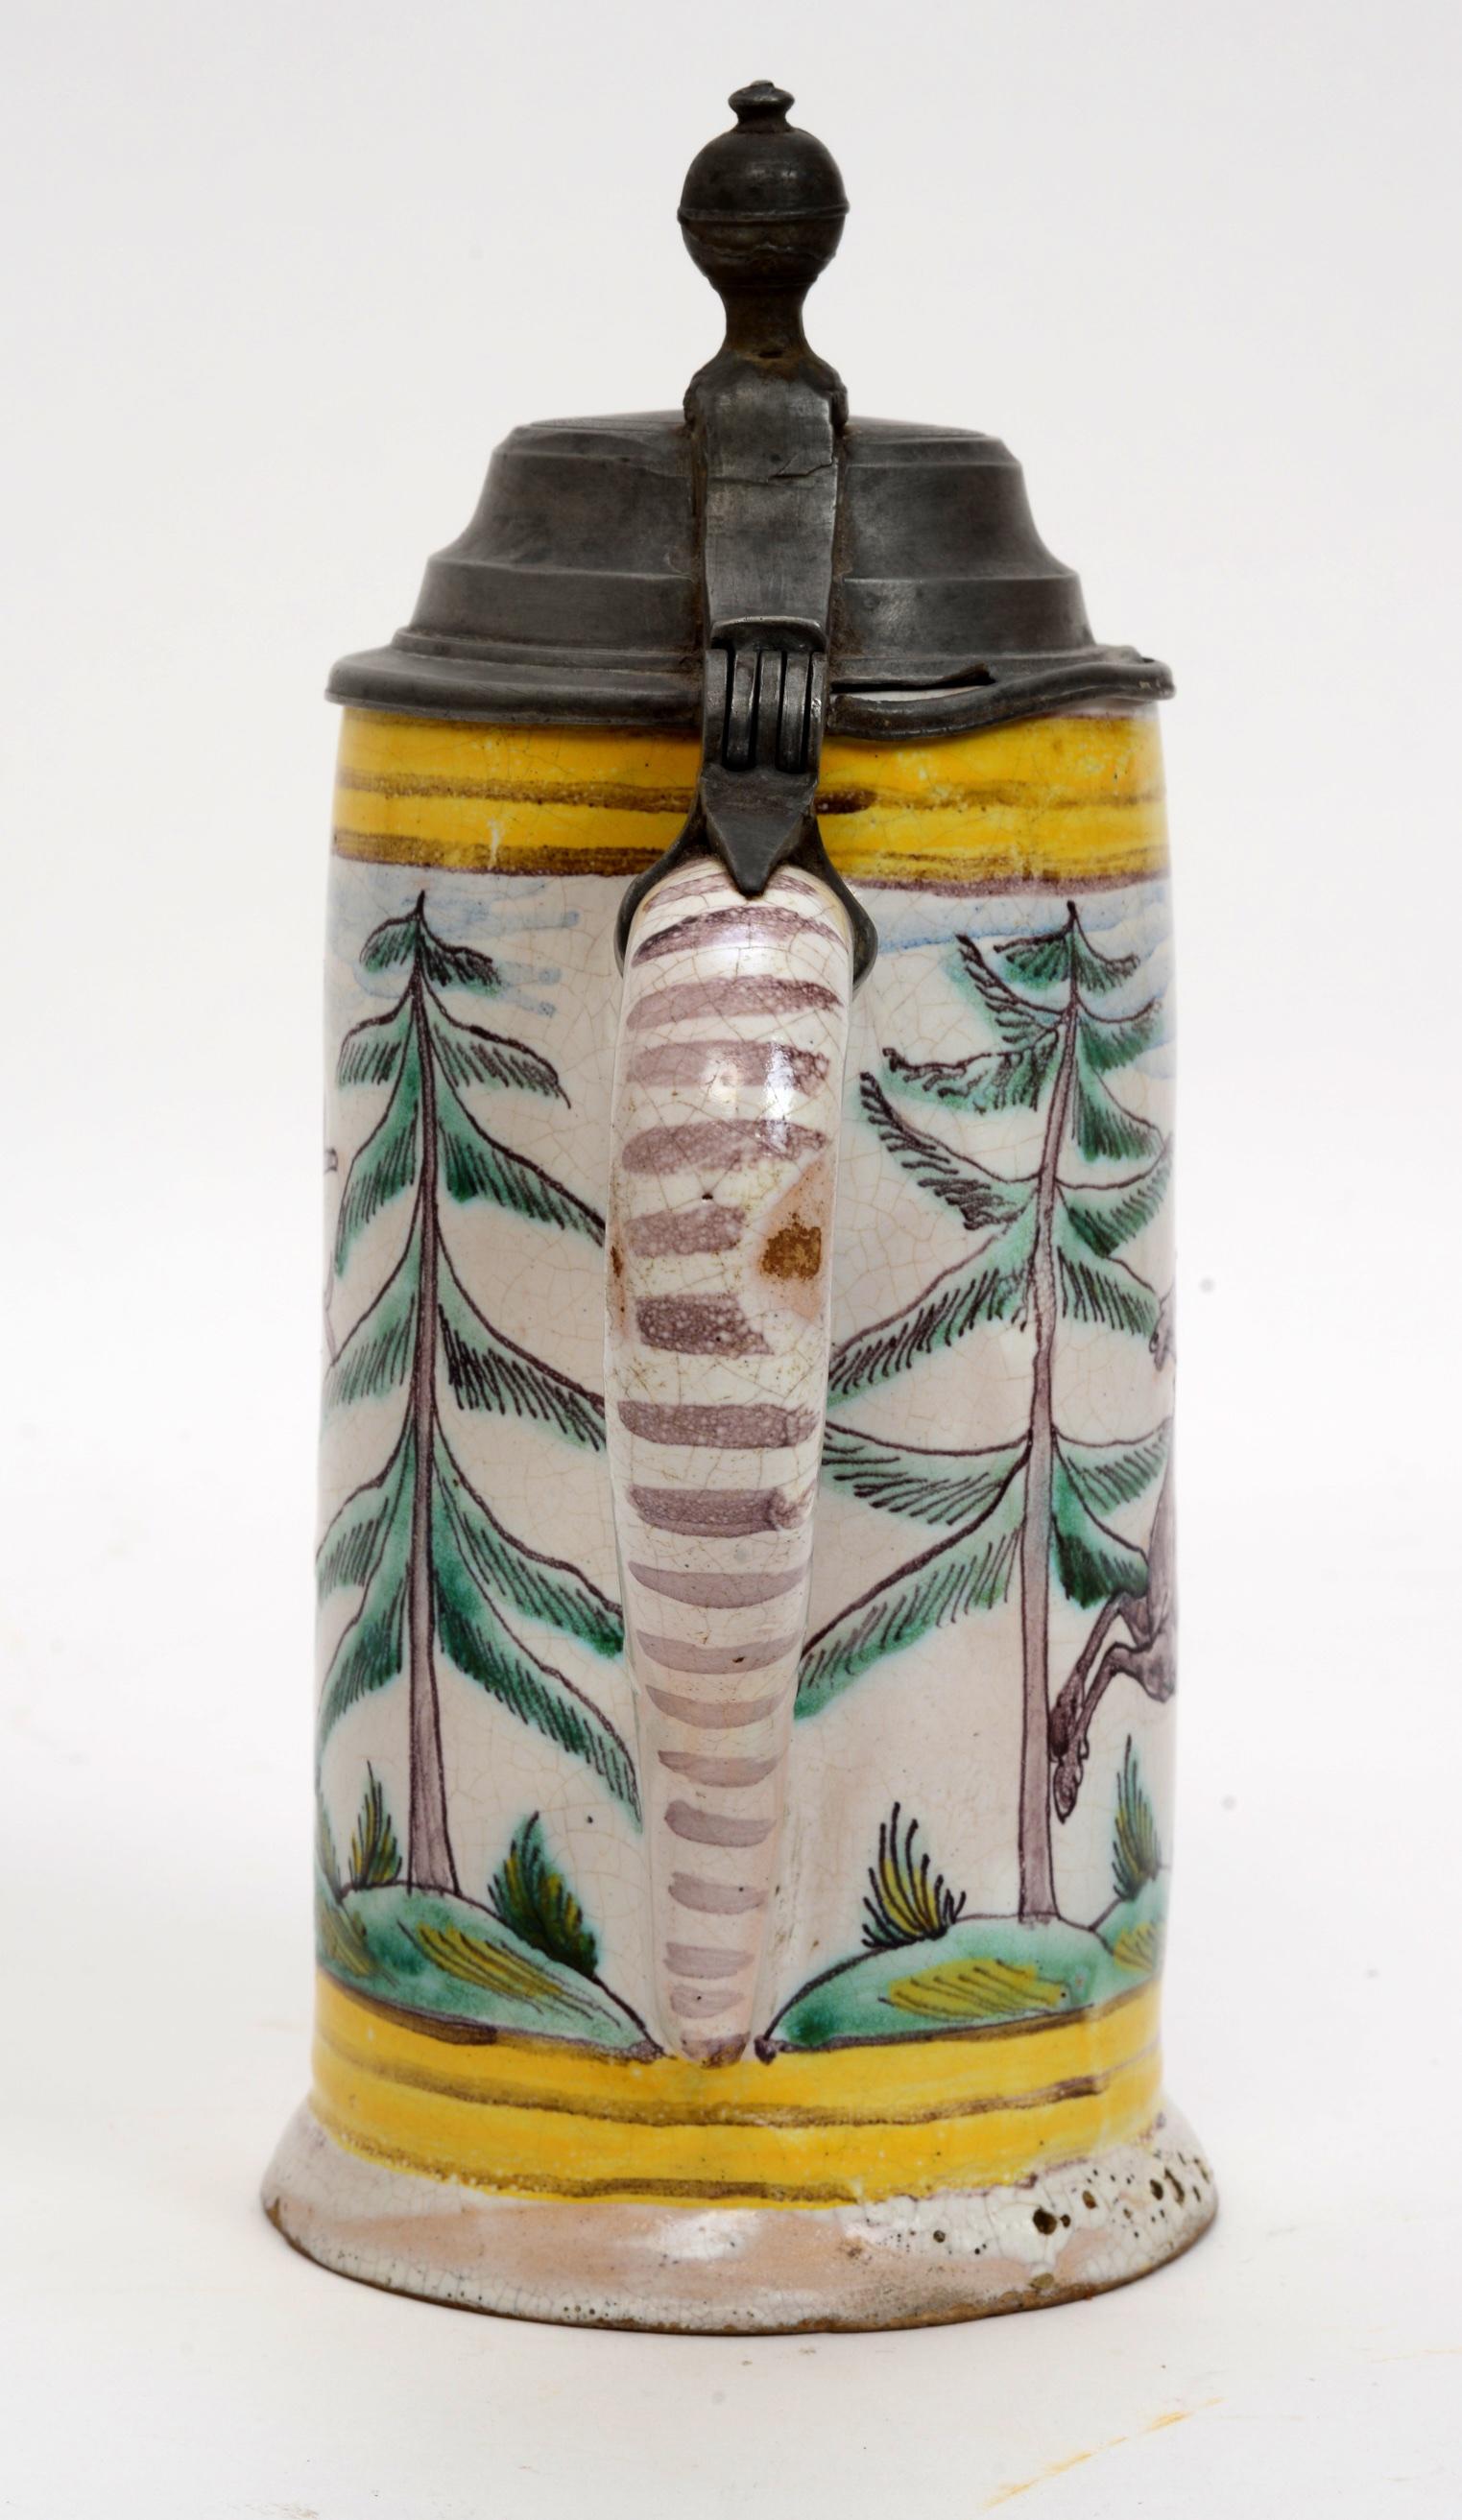 Hand-Painted 18th Century German Pewter Mounted Faience Stein, circa 1780